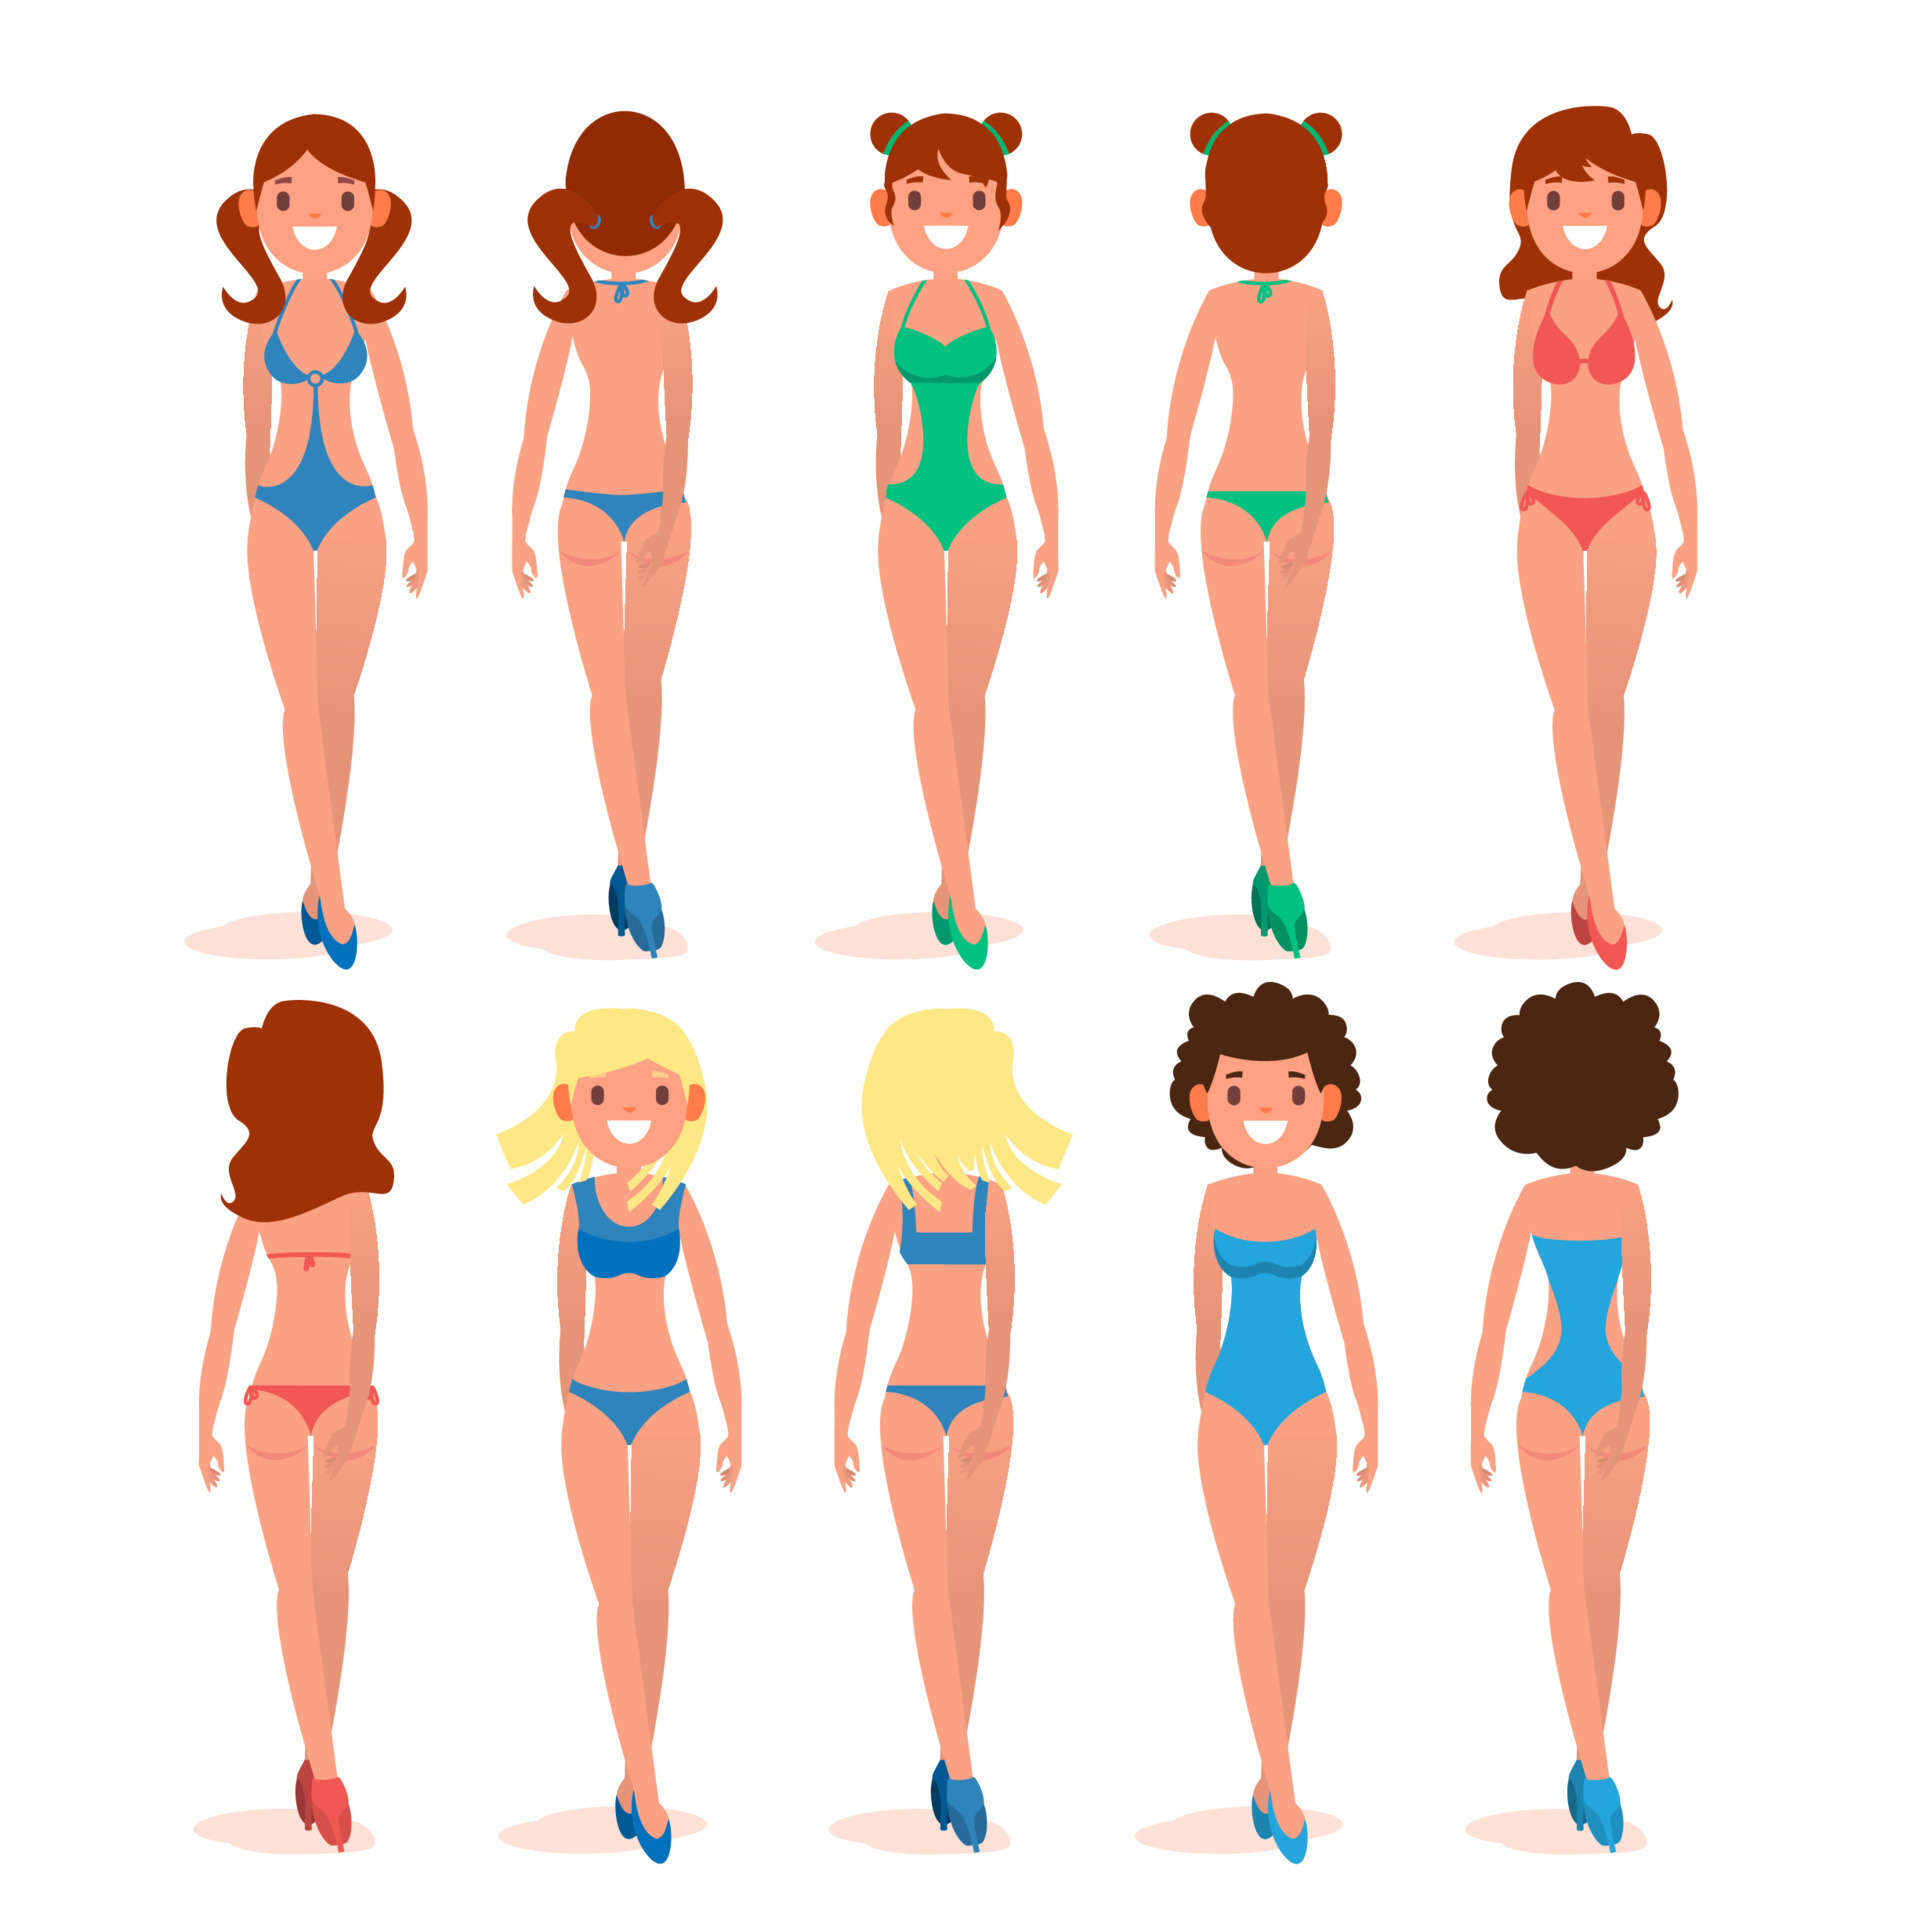 Women s Swimsuit Set Vector. Beautiful Girls In Bathing Suits Of